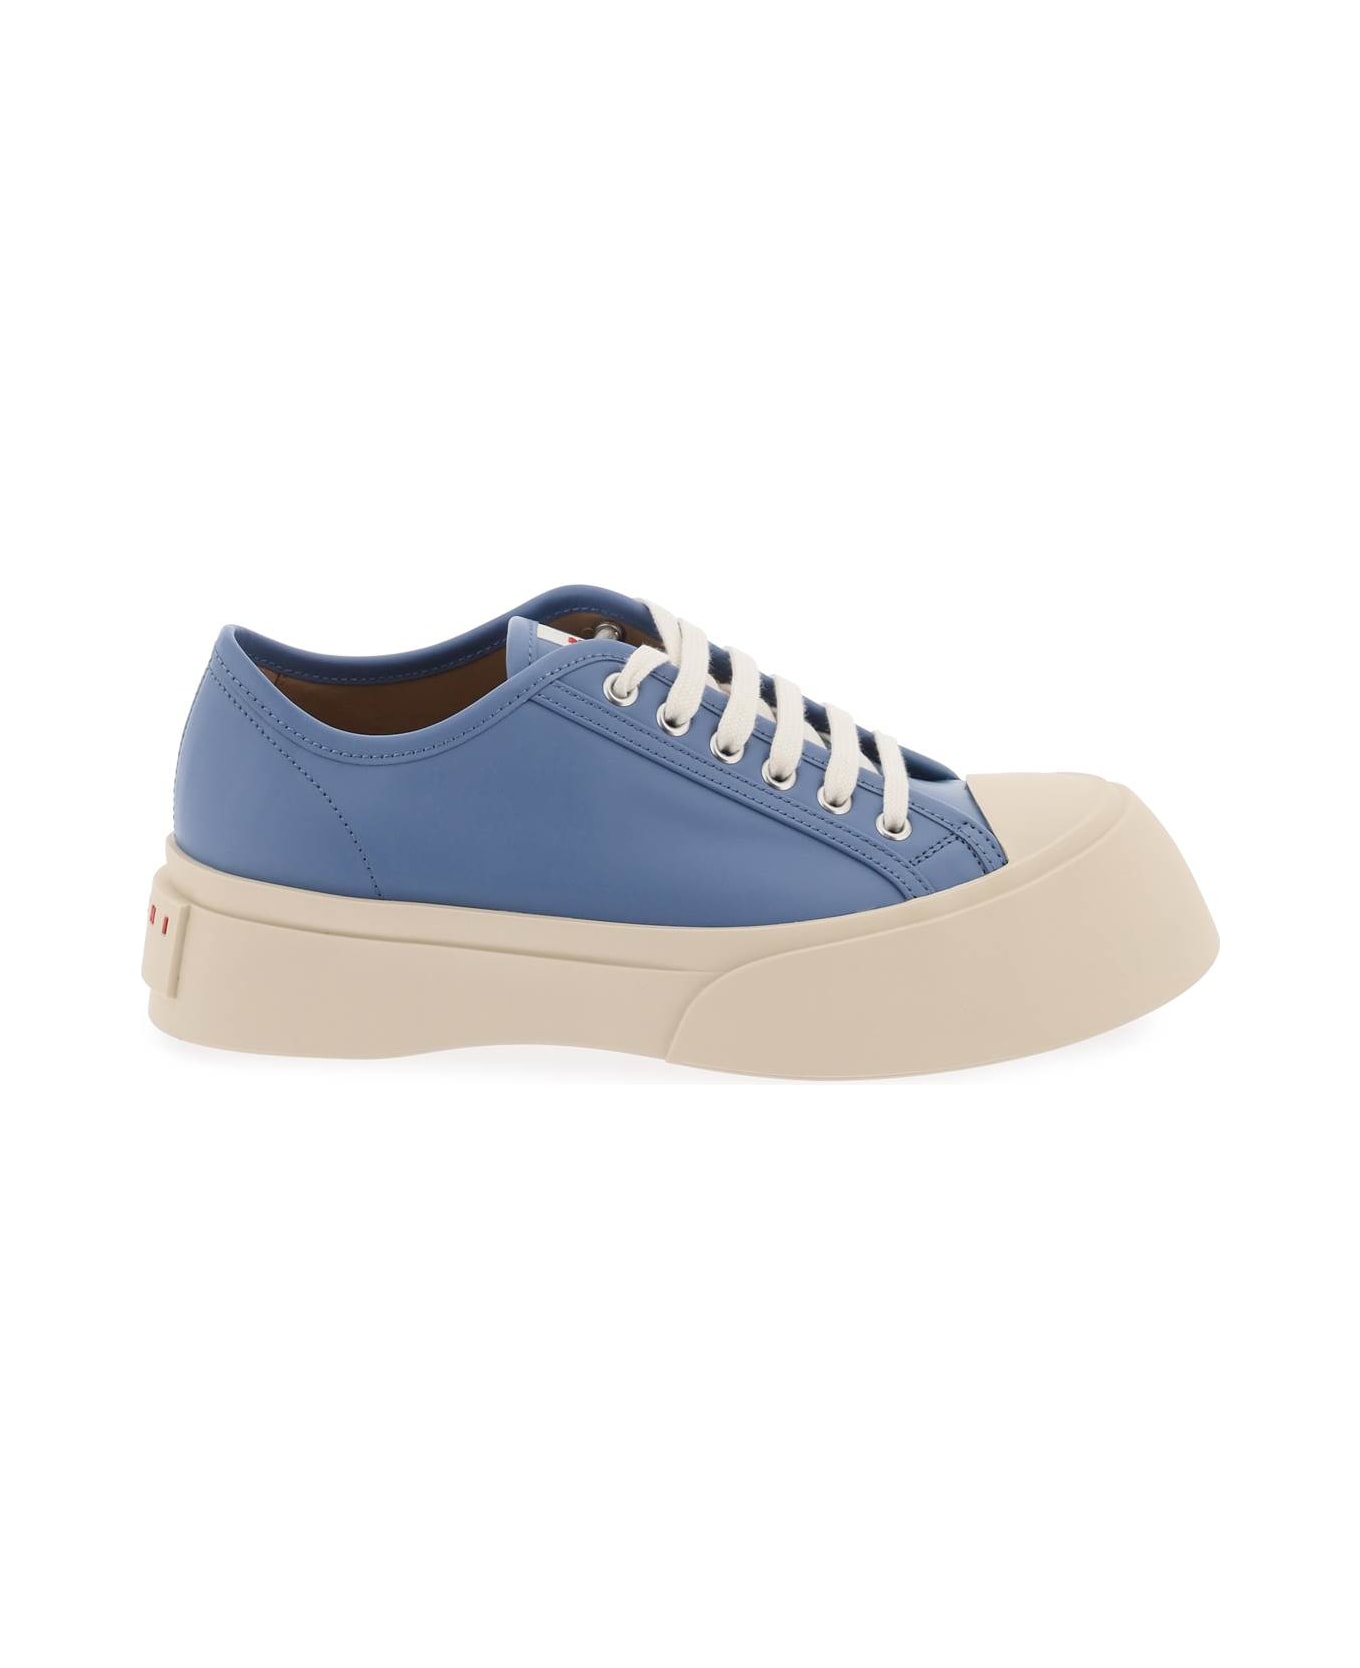 Marni Cerulean Blue Leather Pablo Sneakers - 00B37 スニーカー